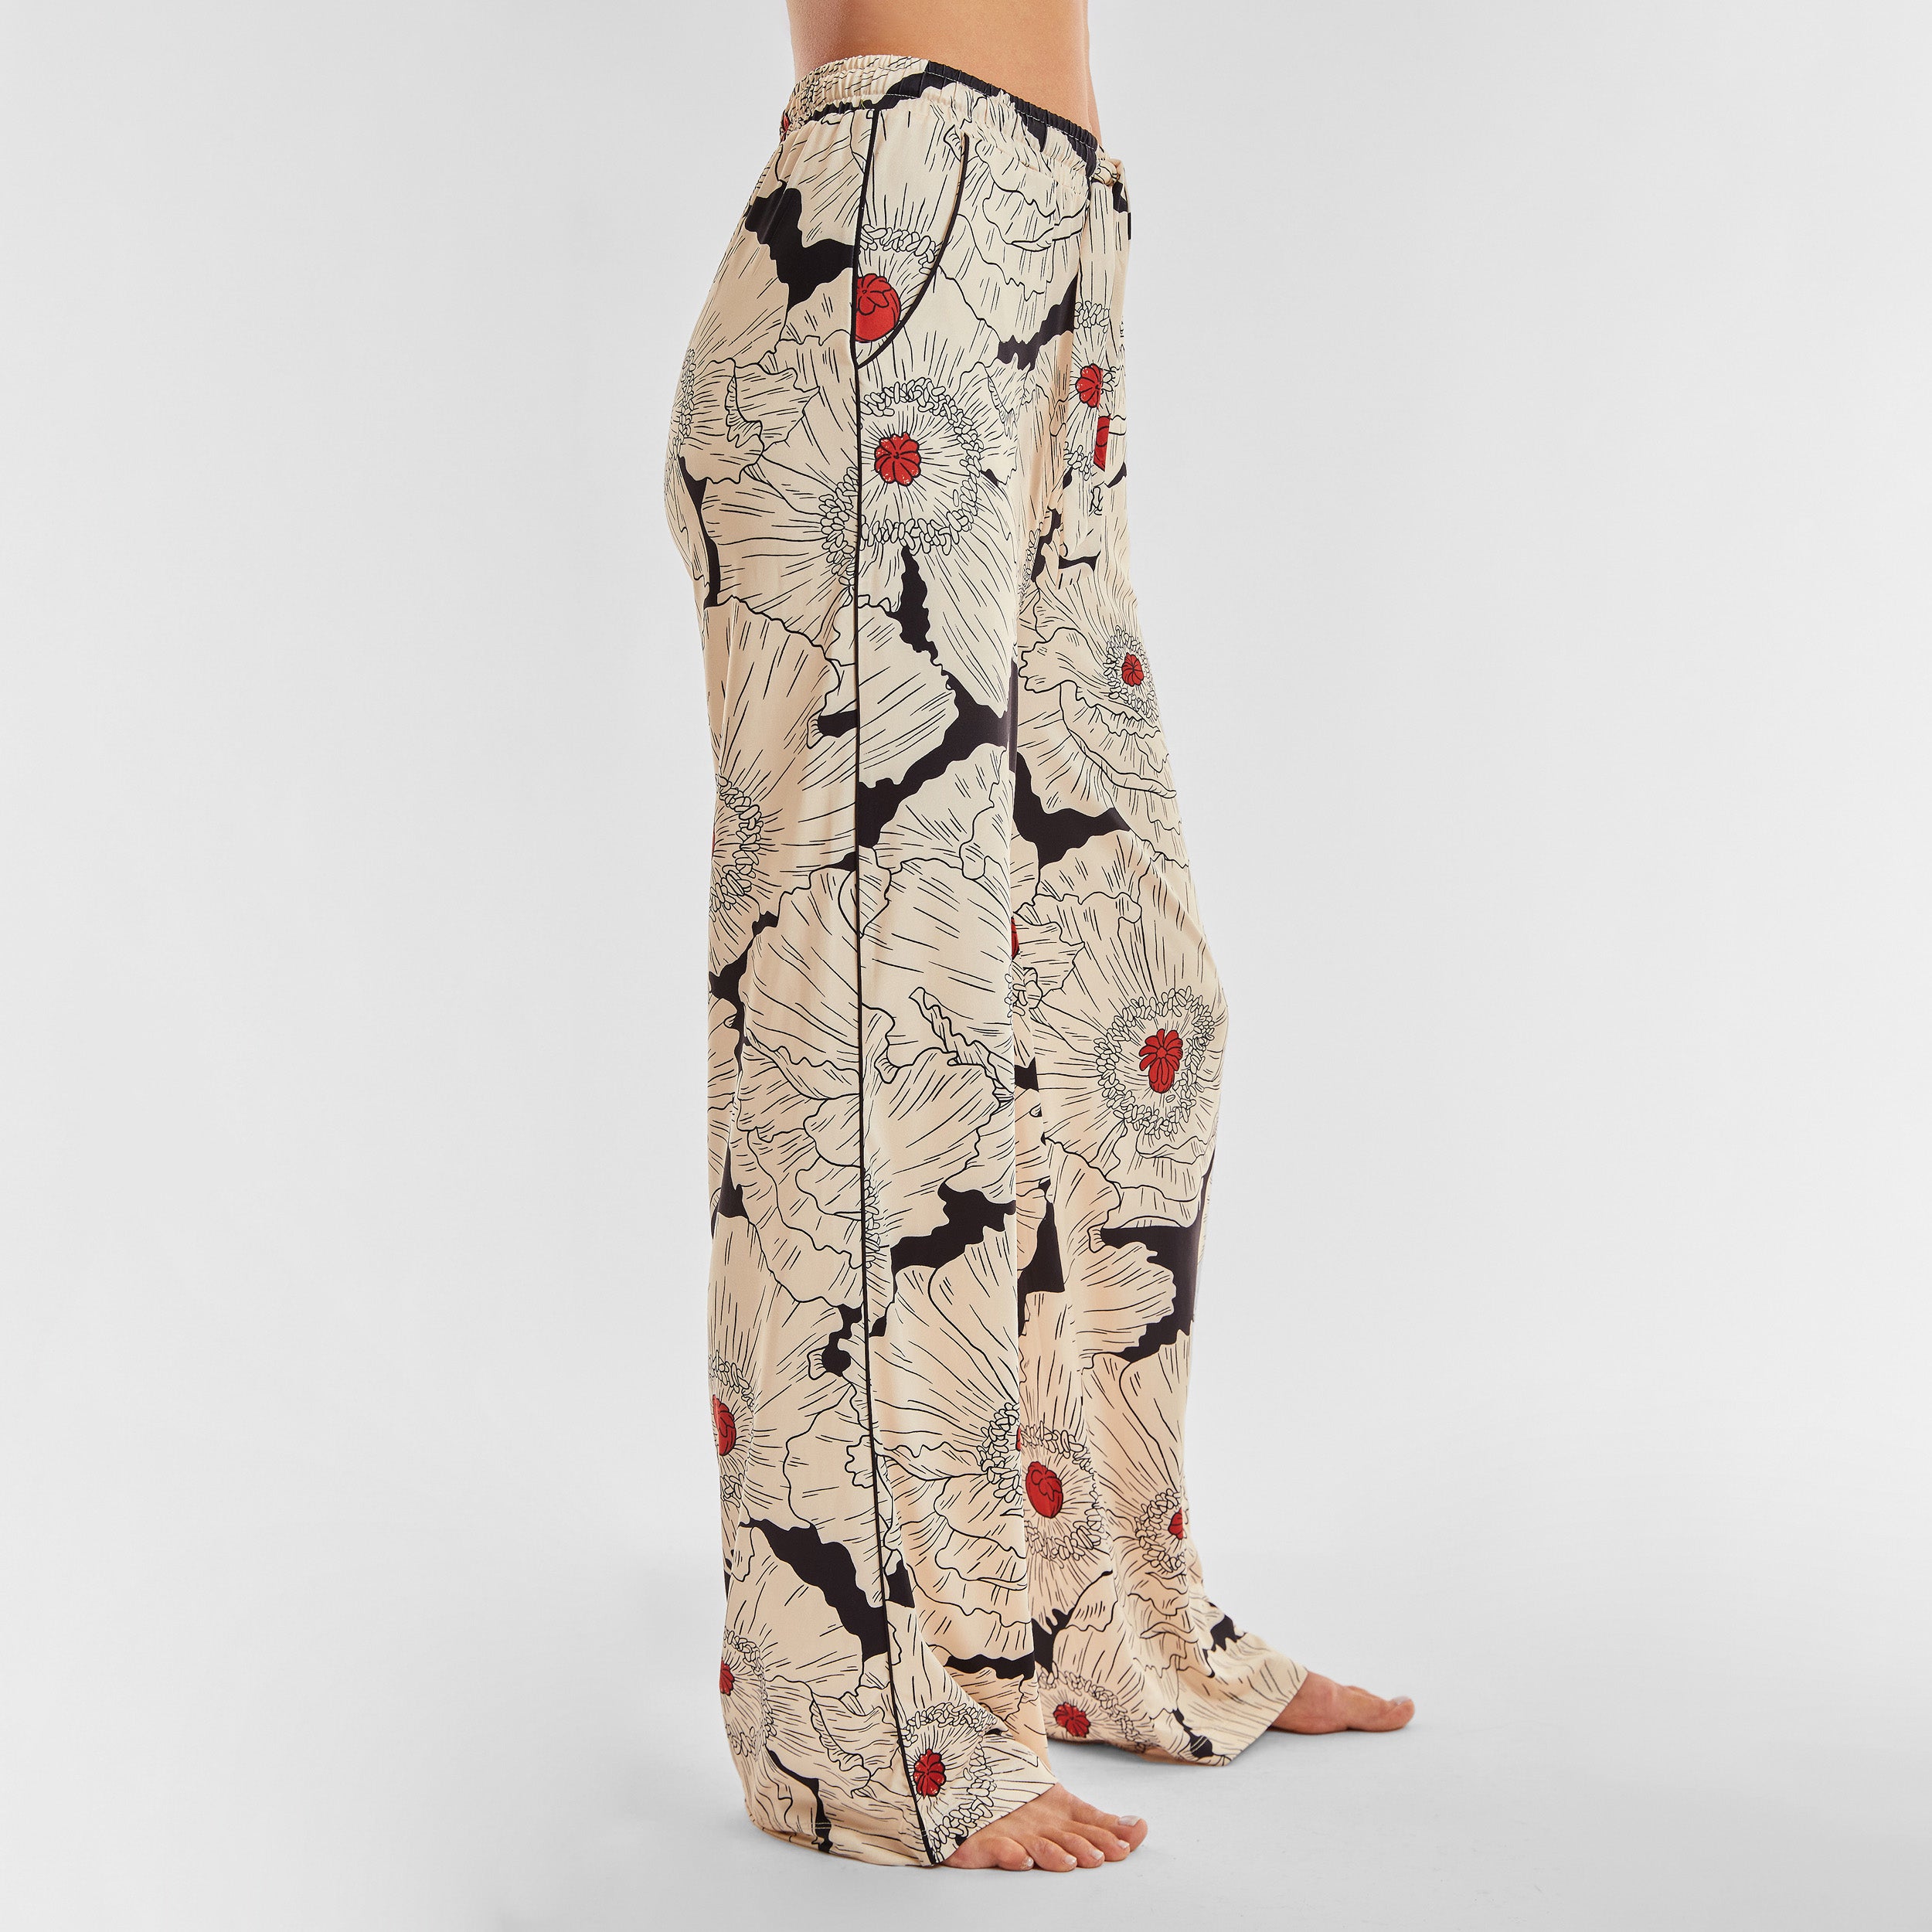 Side view of woman wearing breathable, relaxed and buttery smooth pajama pant featuring high-waist cut, side pockets, front tie and stunning Poppy floral print.